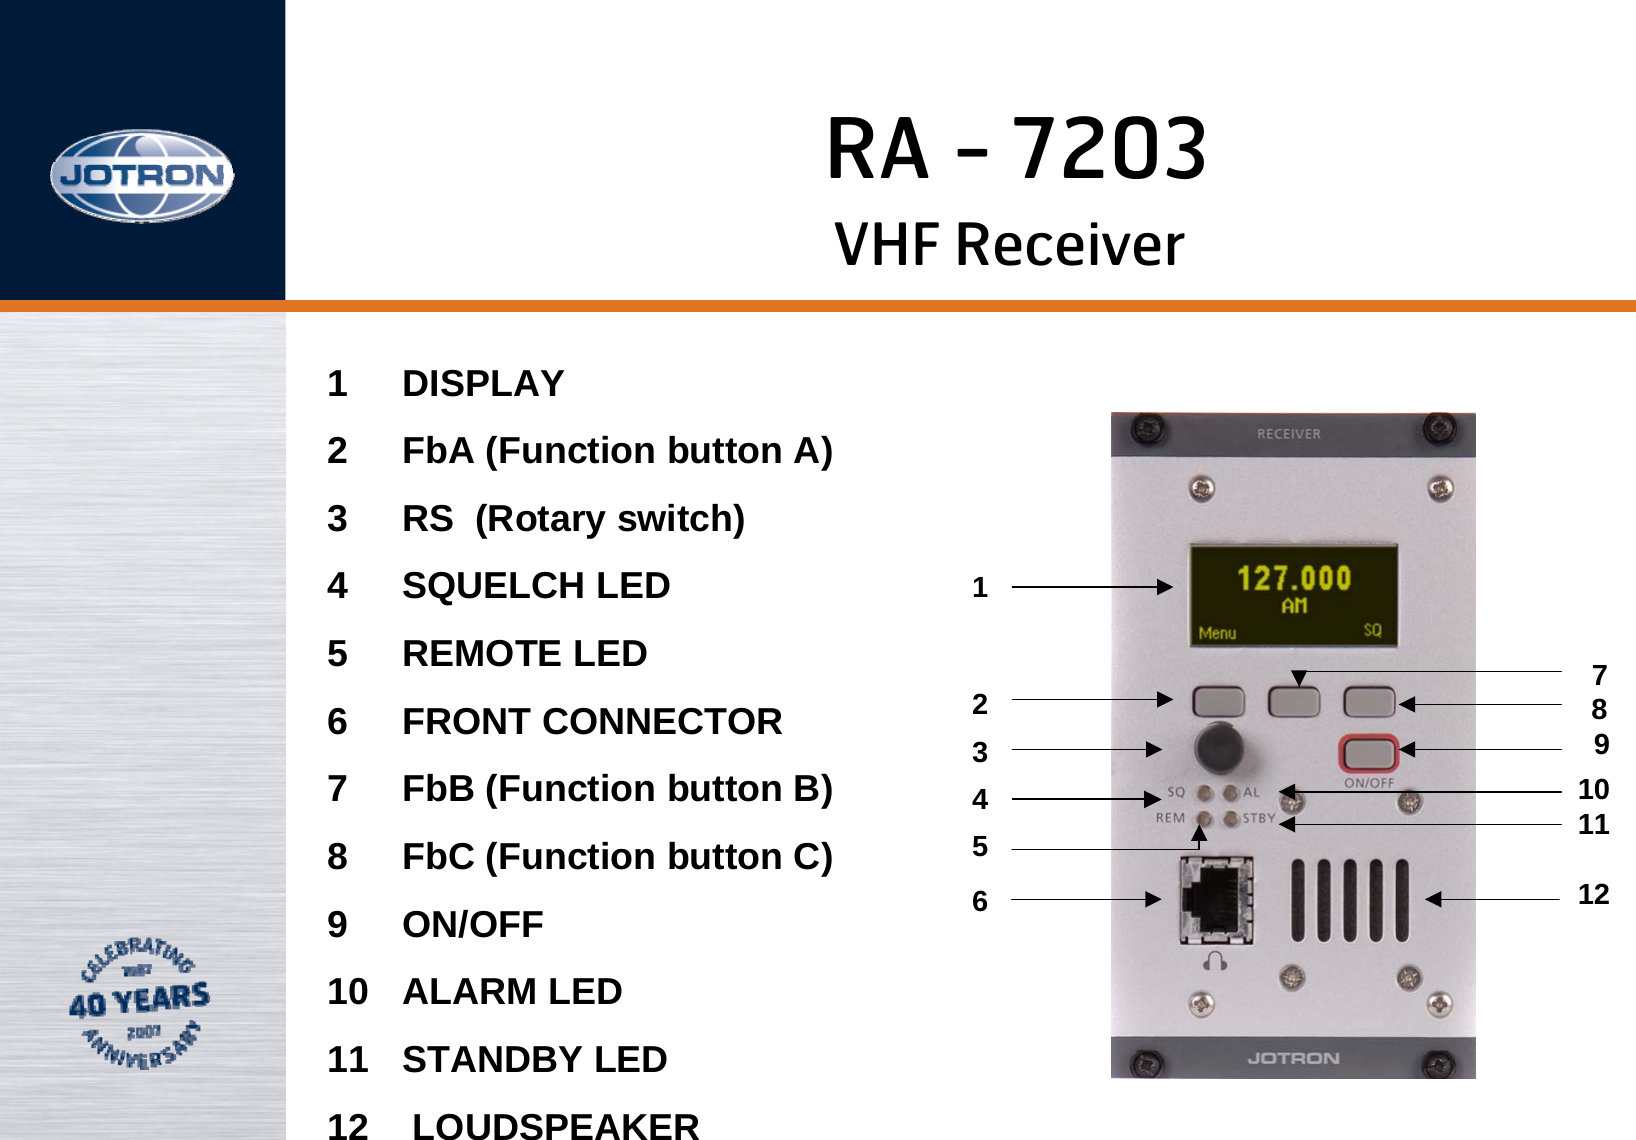 RA - 72031234567891011121 DISPLAY2 FbA (Function button A)3 RS  (Rotary switch)4 SQUELCH LED5 REMOTE LED6 FRONT CONNECTOR 7 FbB (Function button B)8 FbC (Function button C)9 ON/OFF10 ALARM LED11 STANDBY LED12 LOUDSPEAKERVHF Receiver